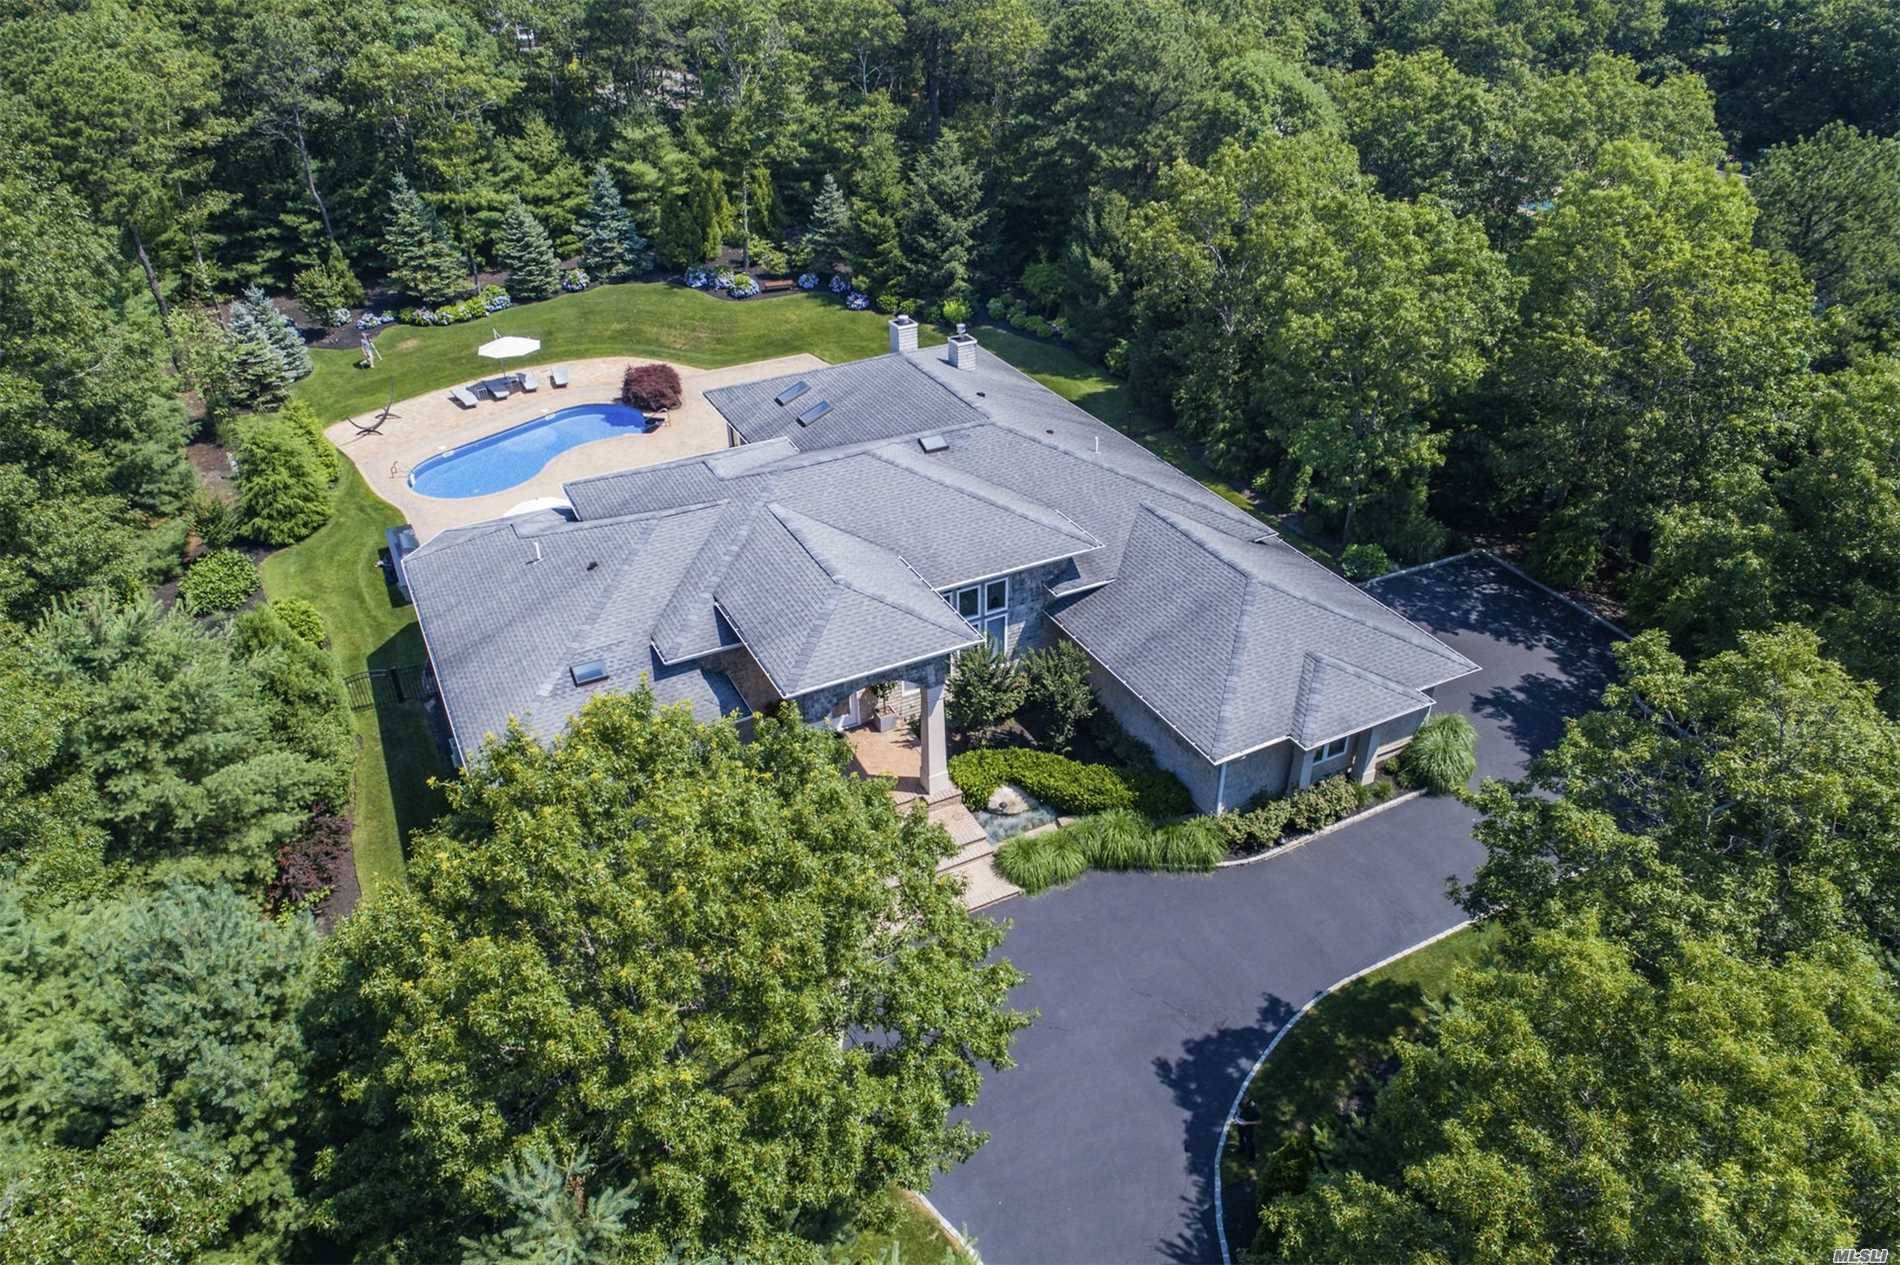 This Beautifully Updated Smart Home In Southampton Township Is Surrounded By Walls Of Glass And Exquisite Architectural Details And Design.